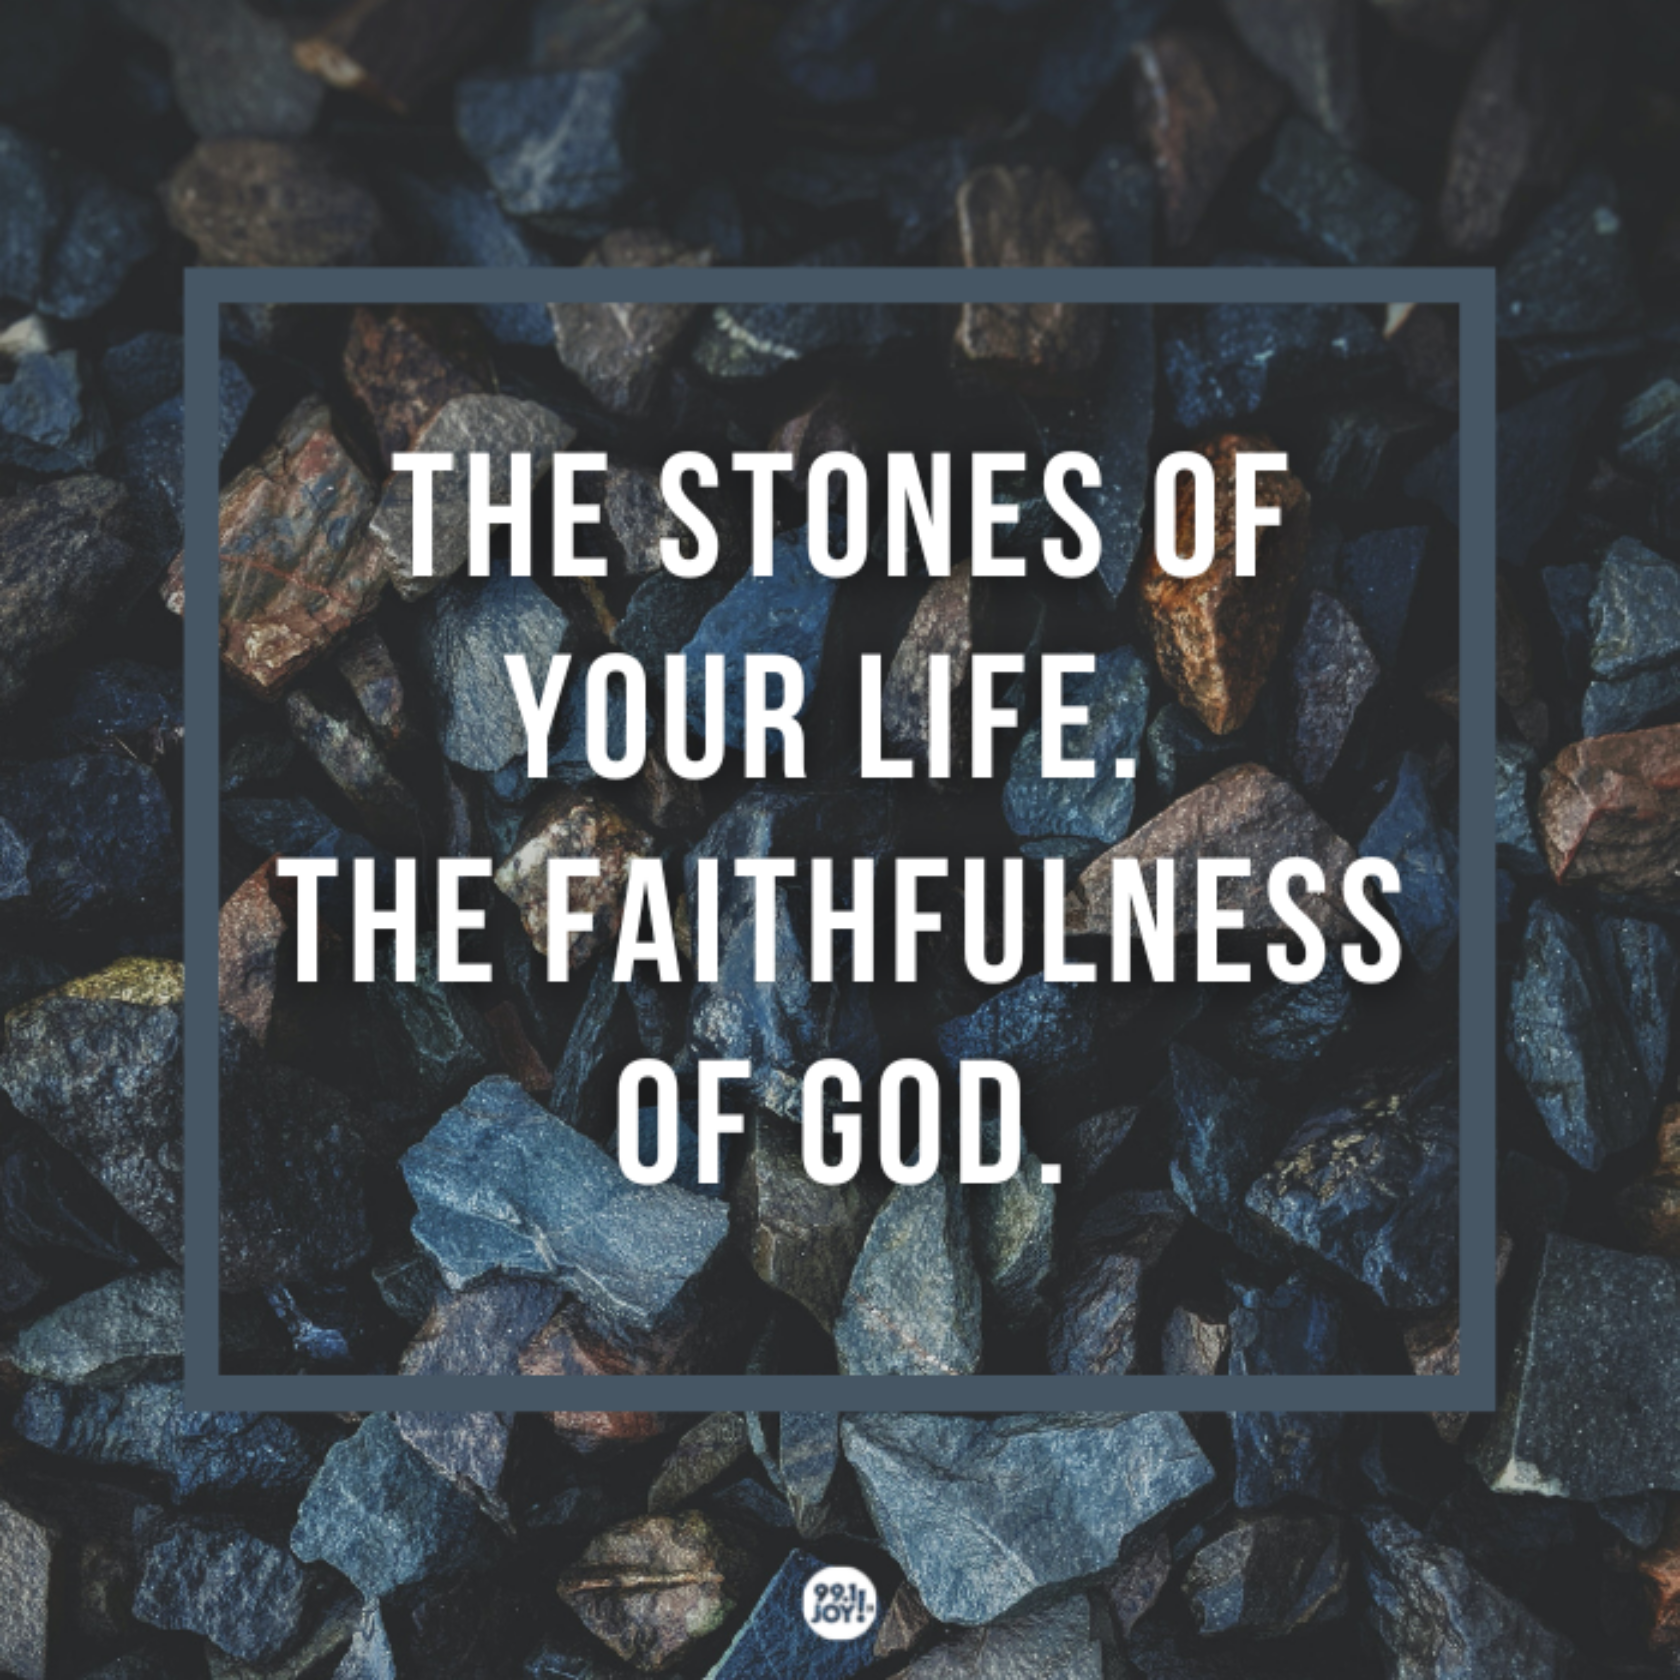 The Stones Of Your Life. The Faithfulness Of God.